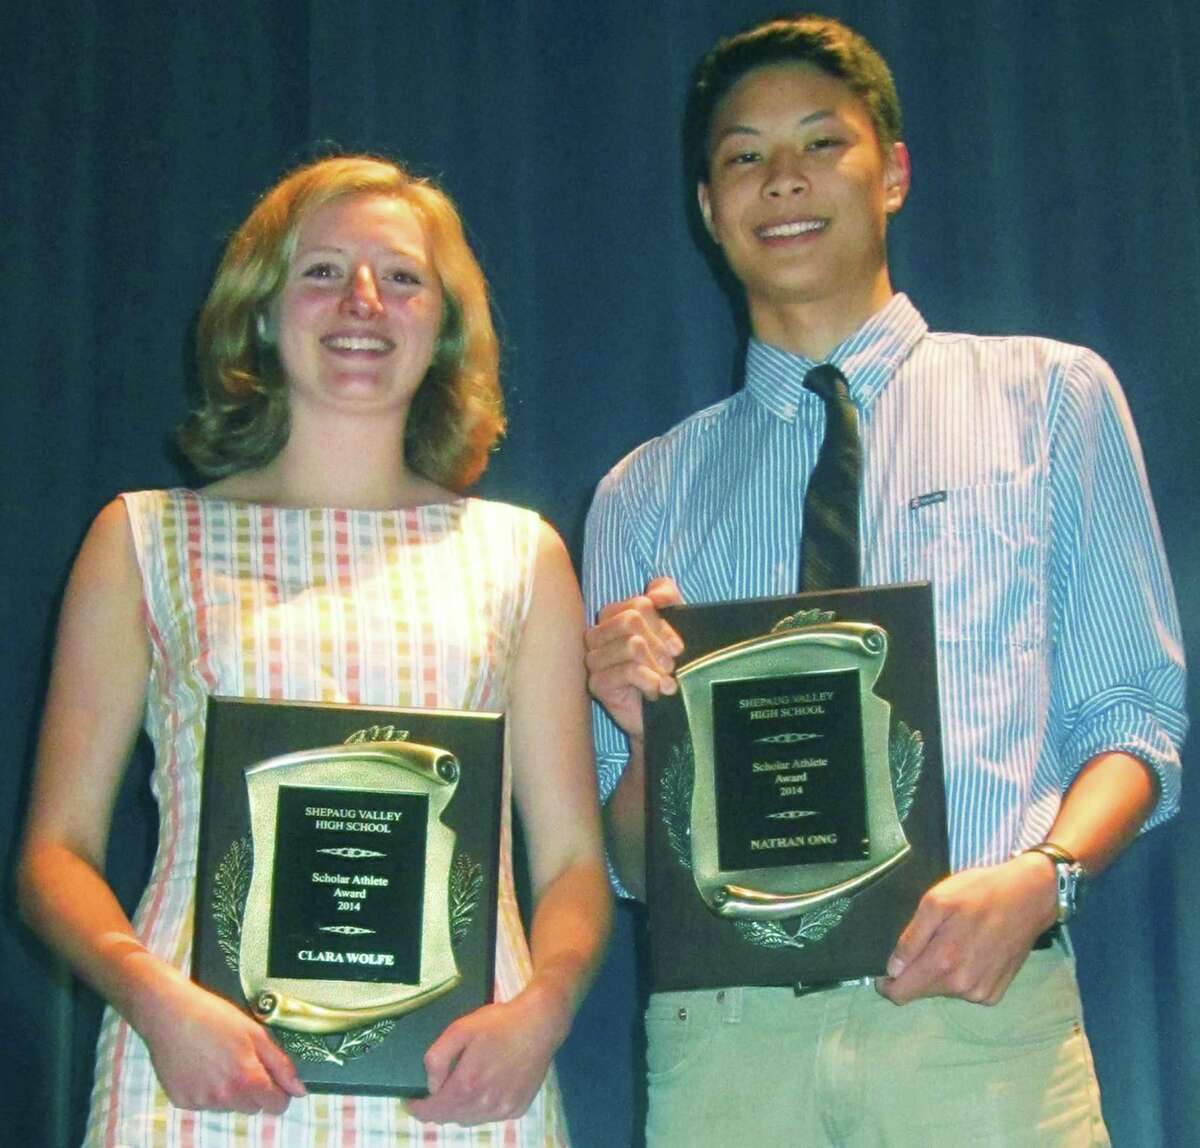 Recognized during Shepaug Valley High School's annual athletic awards ceremony as the school's top scholar-athletes were Clara Wolfe and Nathan Ong, June 6, 2014 at the school in Washington. Clara and Nathan were later honored as the top Spartan female and male athletes over the past four years.